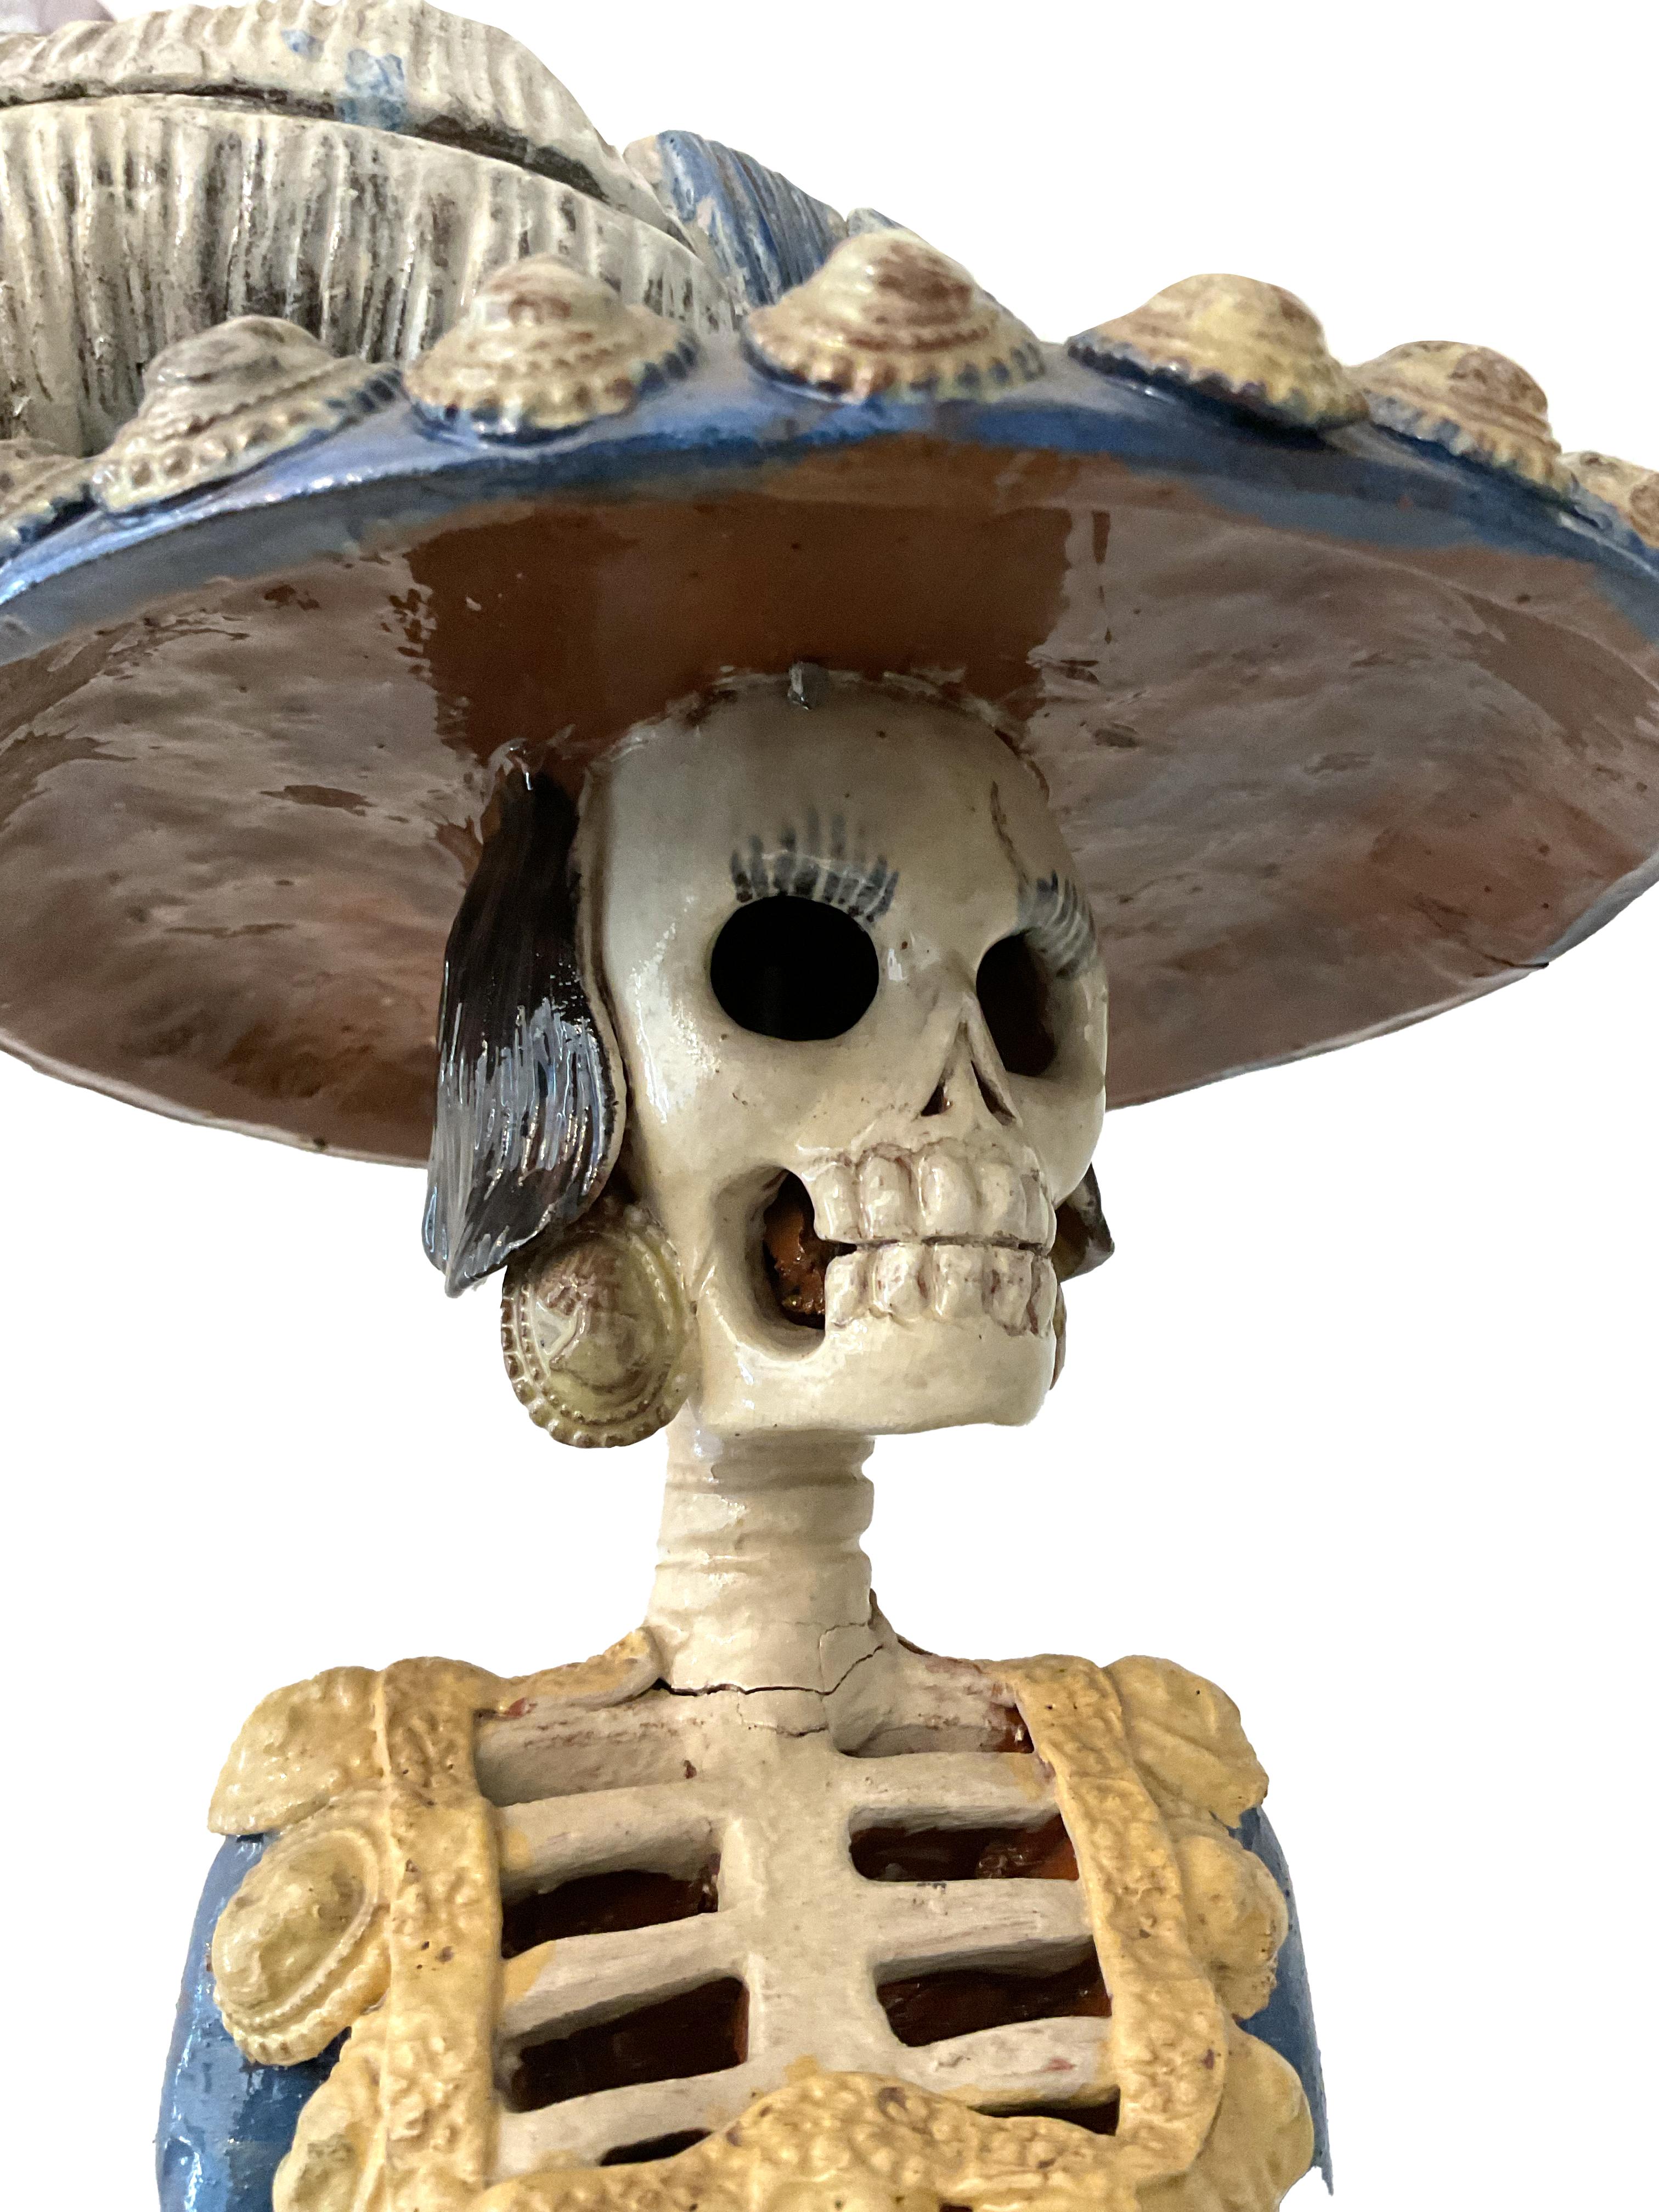 Mexican artist of the 20th century
Catrina

polychrome painted terracotta sculpture
cm. 61x22x19
Mexico, mid-20th century

In good overall condition, some minor defects as evidenced by photographs.

This particular sculpture depicts the Catrina,